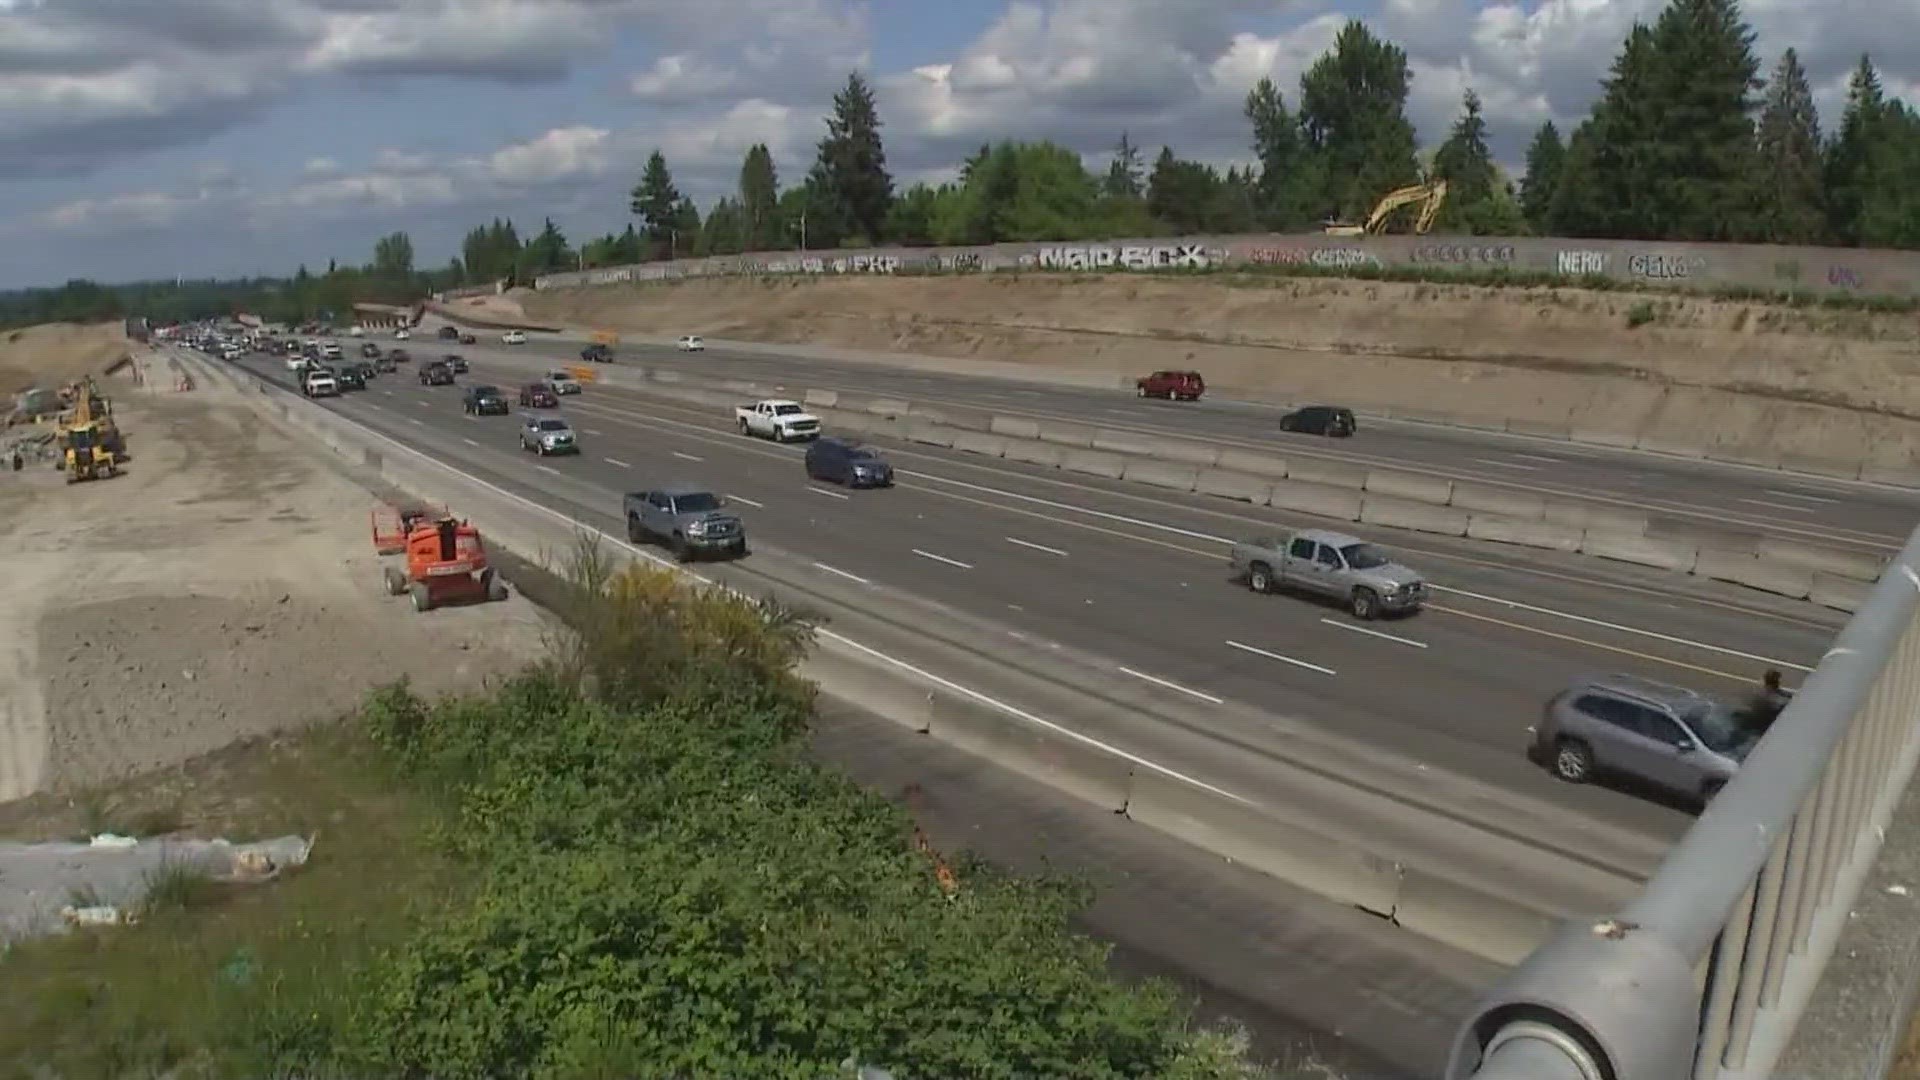 One big project will be to develop a three-mile expressway to connect State Route 509 to I-5